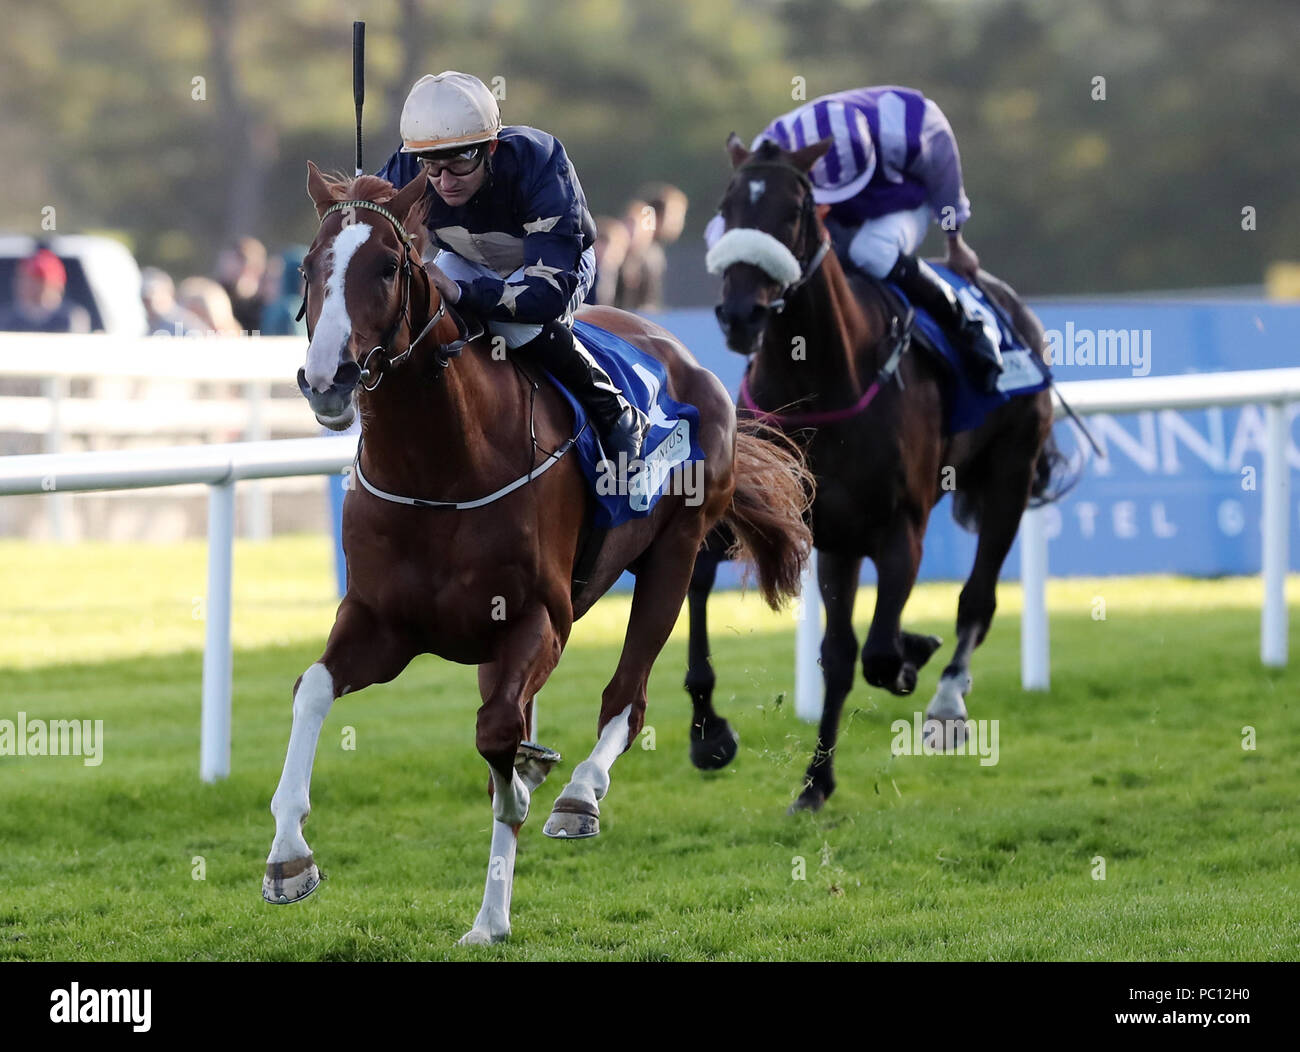 Baba Boom ridden by Shane Foley wins The Eventus Handicap during day one of the Galway Summer Festival at Galway Racecourse. Stock Photo